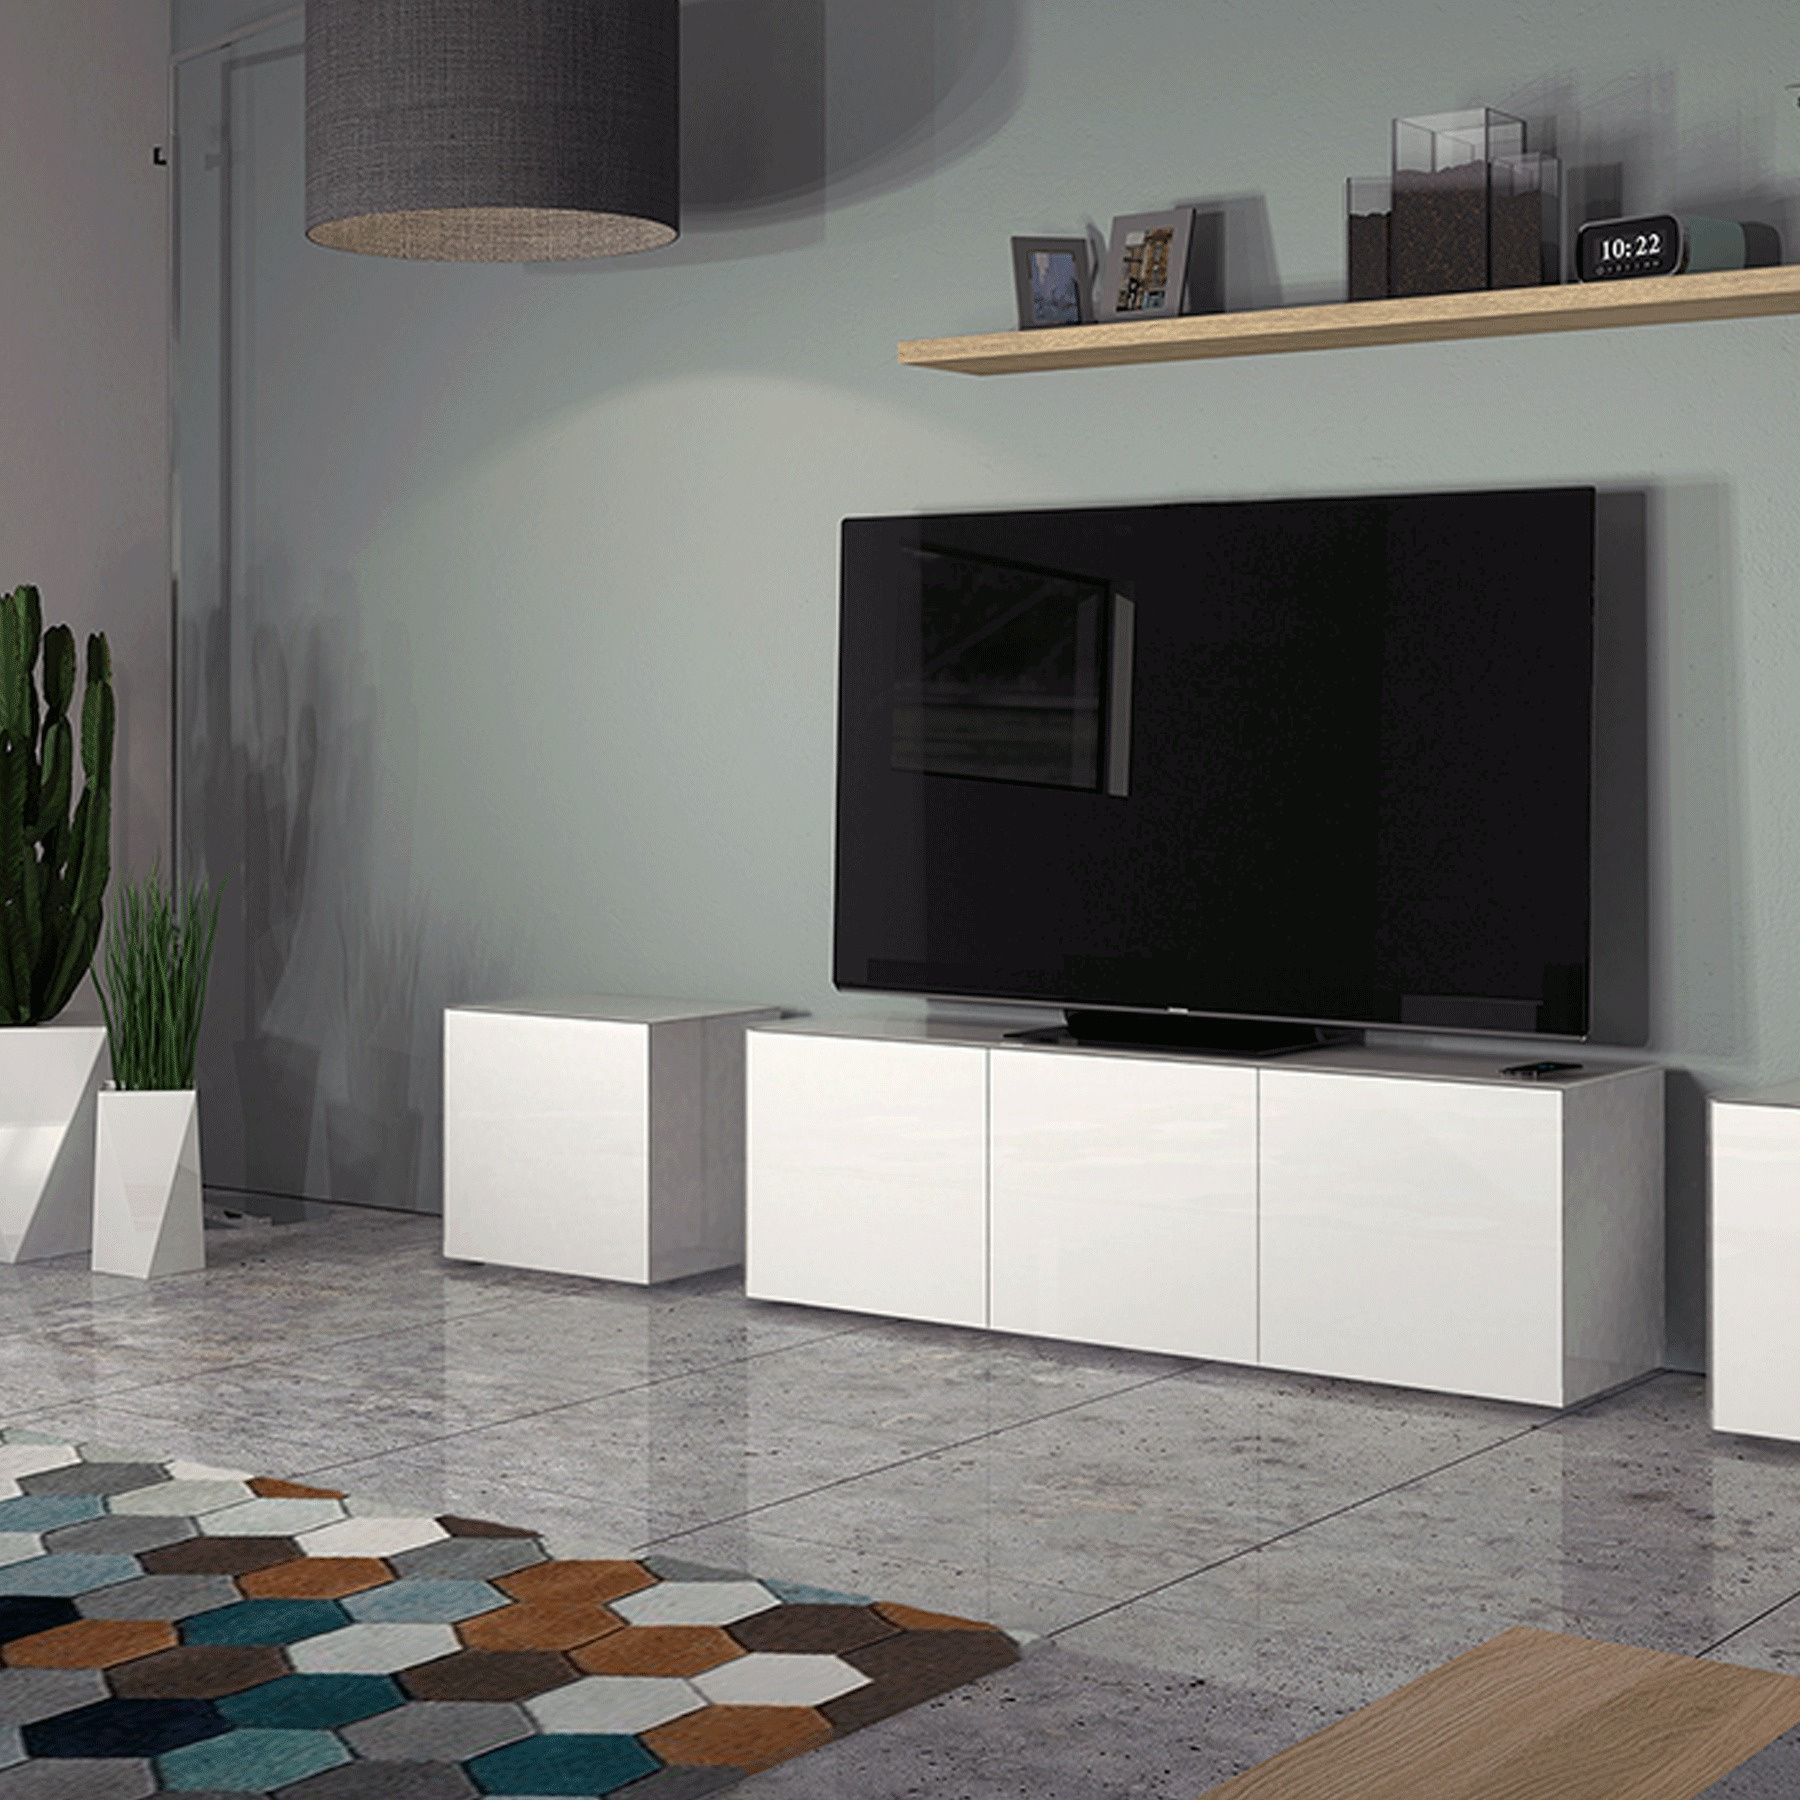 Invictus White Tv Stand For Up To 70" Tvs Pertaining To Kinsella Tv Stands For Tvs Up To 70" (View 15 of 15)